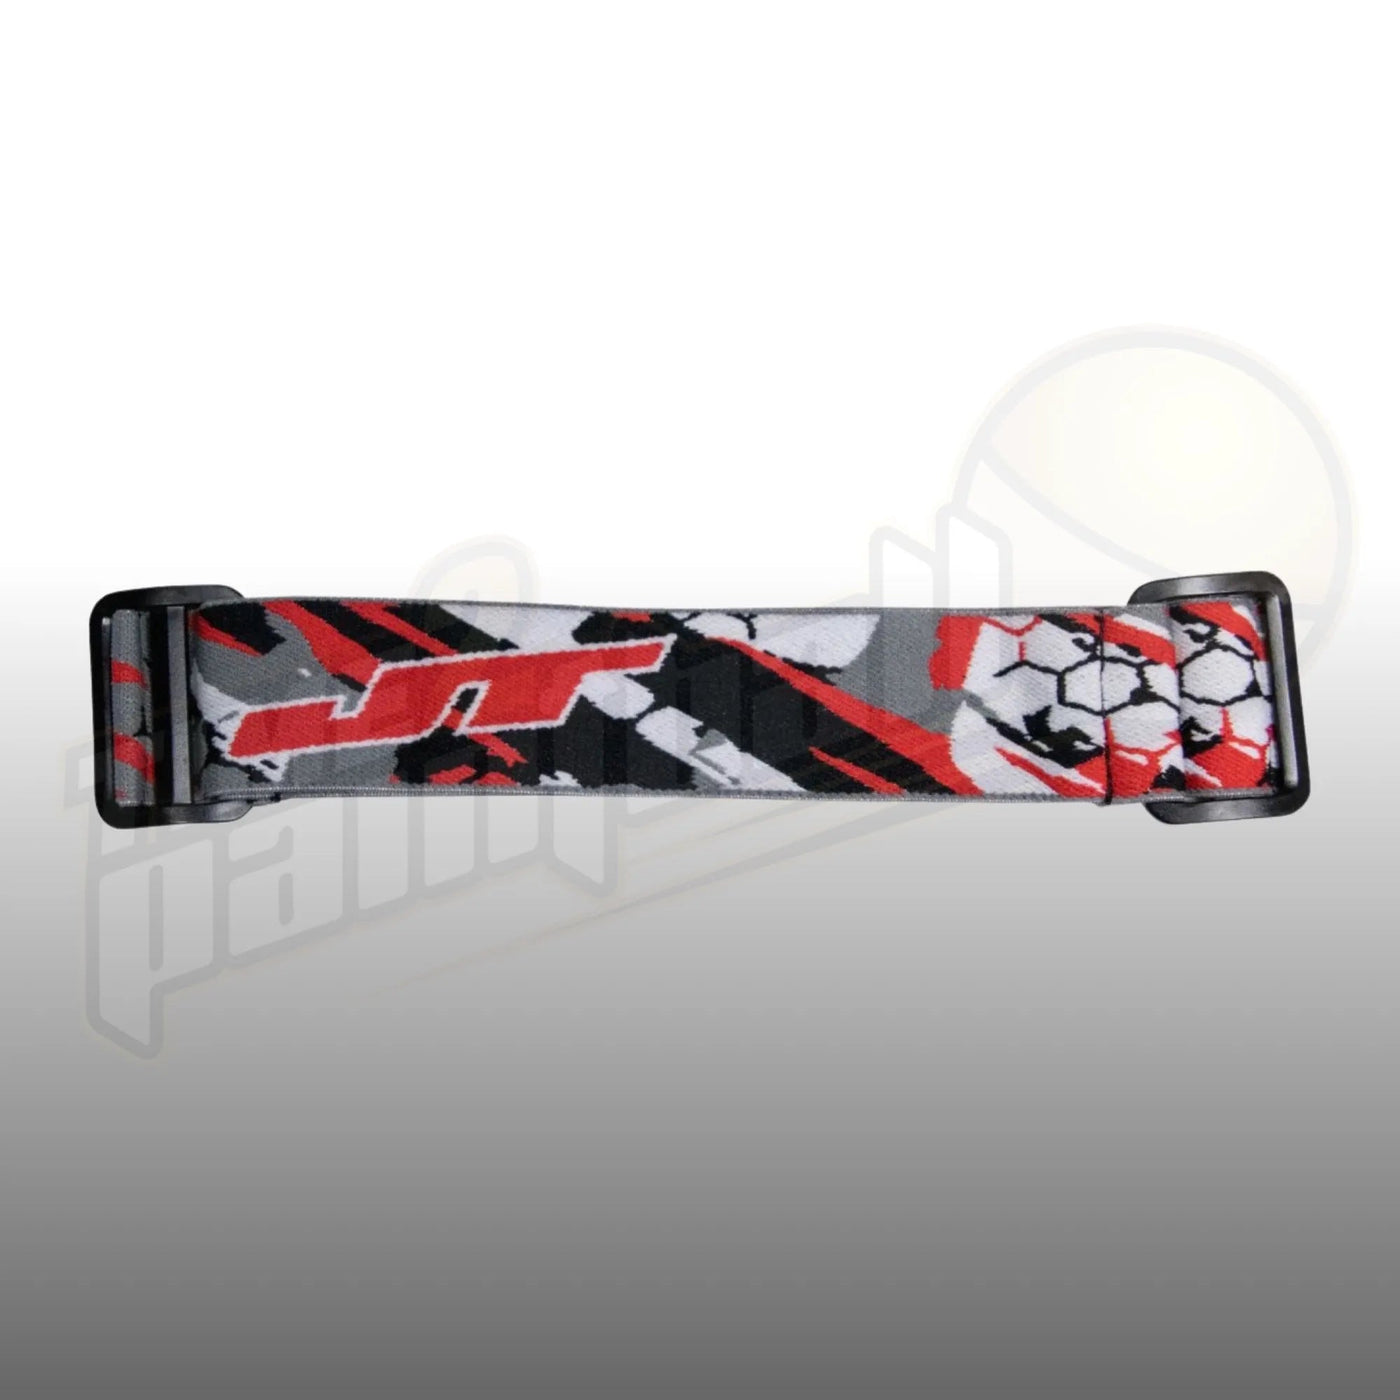 JT Spectra Proflex Parts - MOTO Woven Goggle Strap Red - Time 2 Paintball